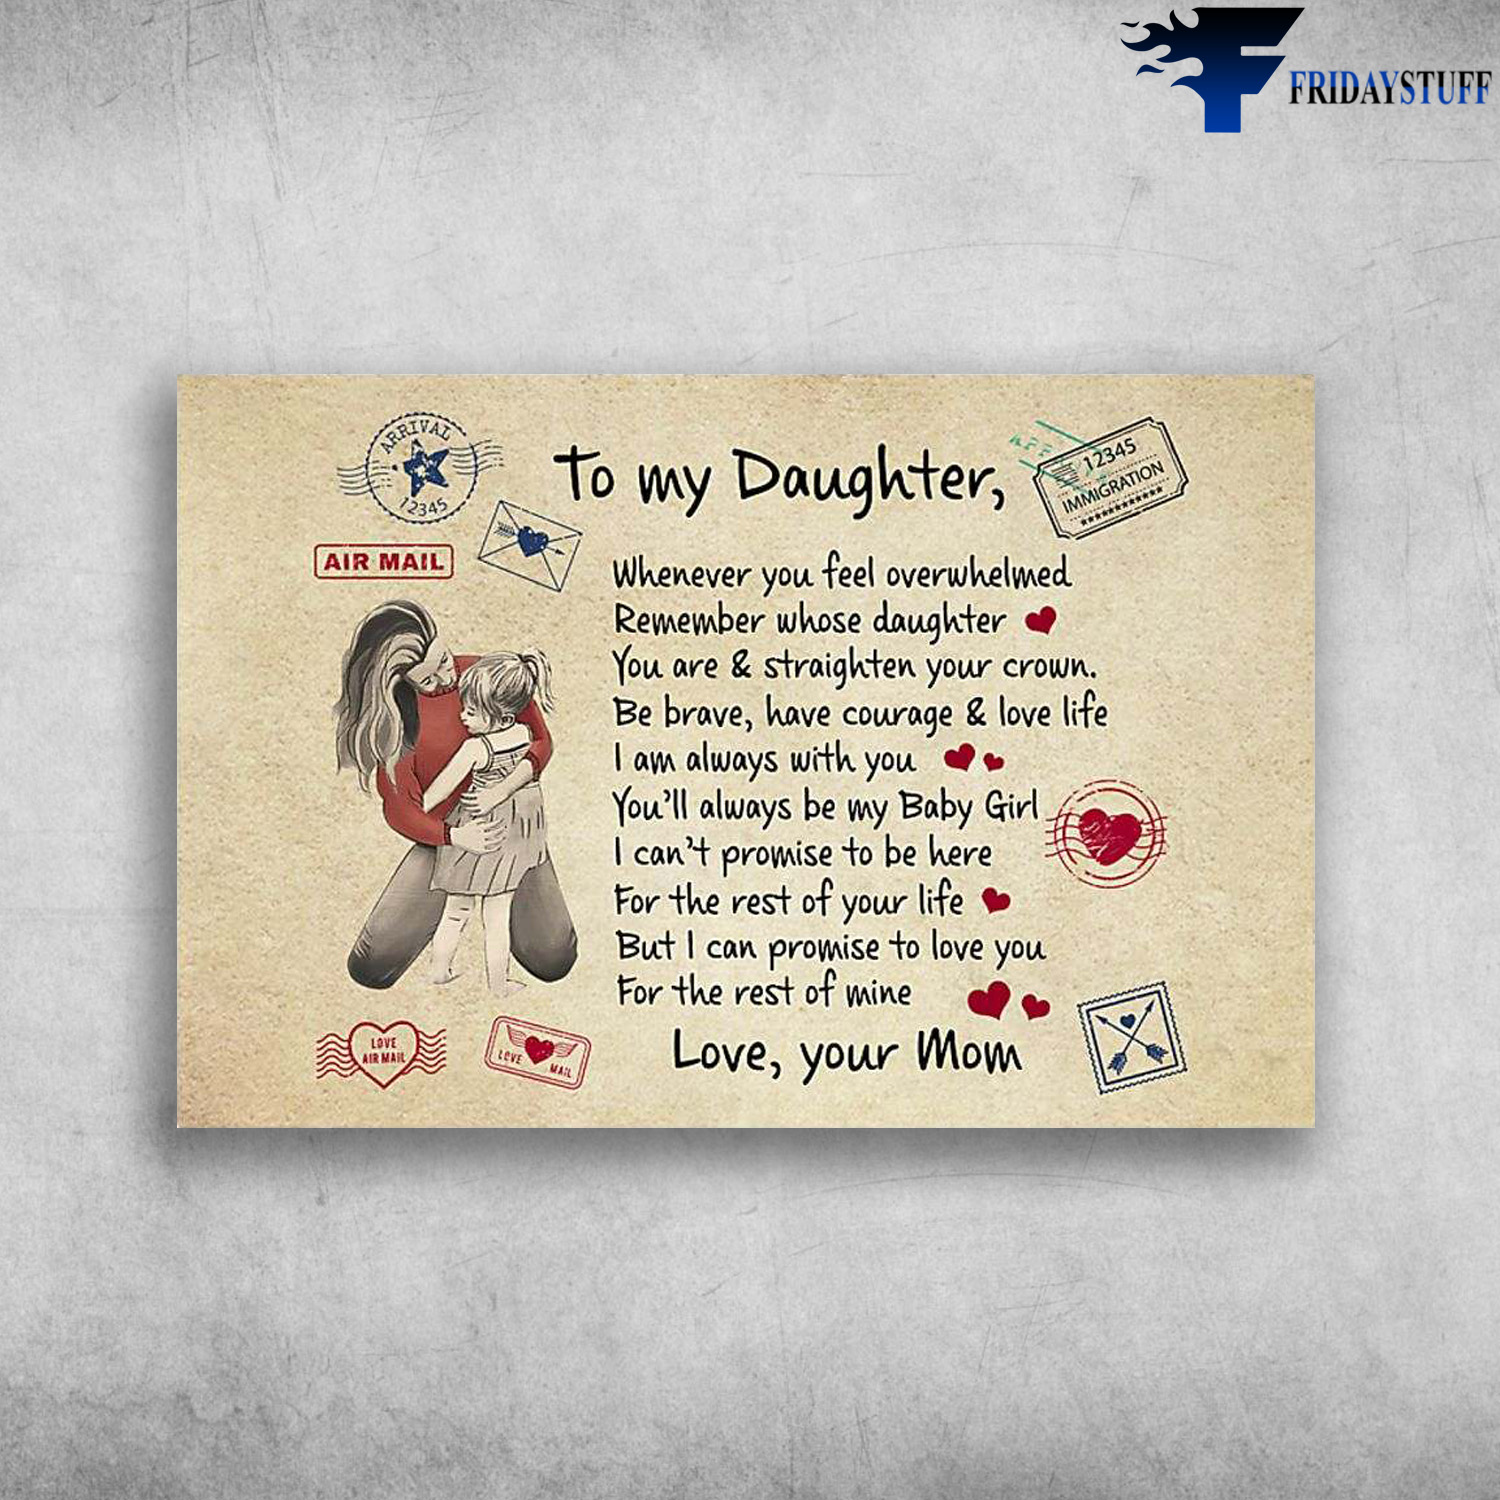 BM-Whenever 0319 Whenever You Feel Overwhelmed Remember Whose Daughter Bookmark Inspirational Women Bookmark Mom Daughter